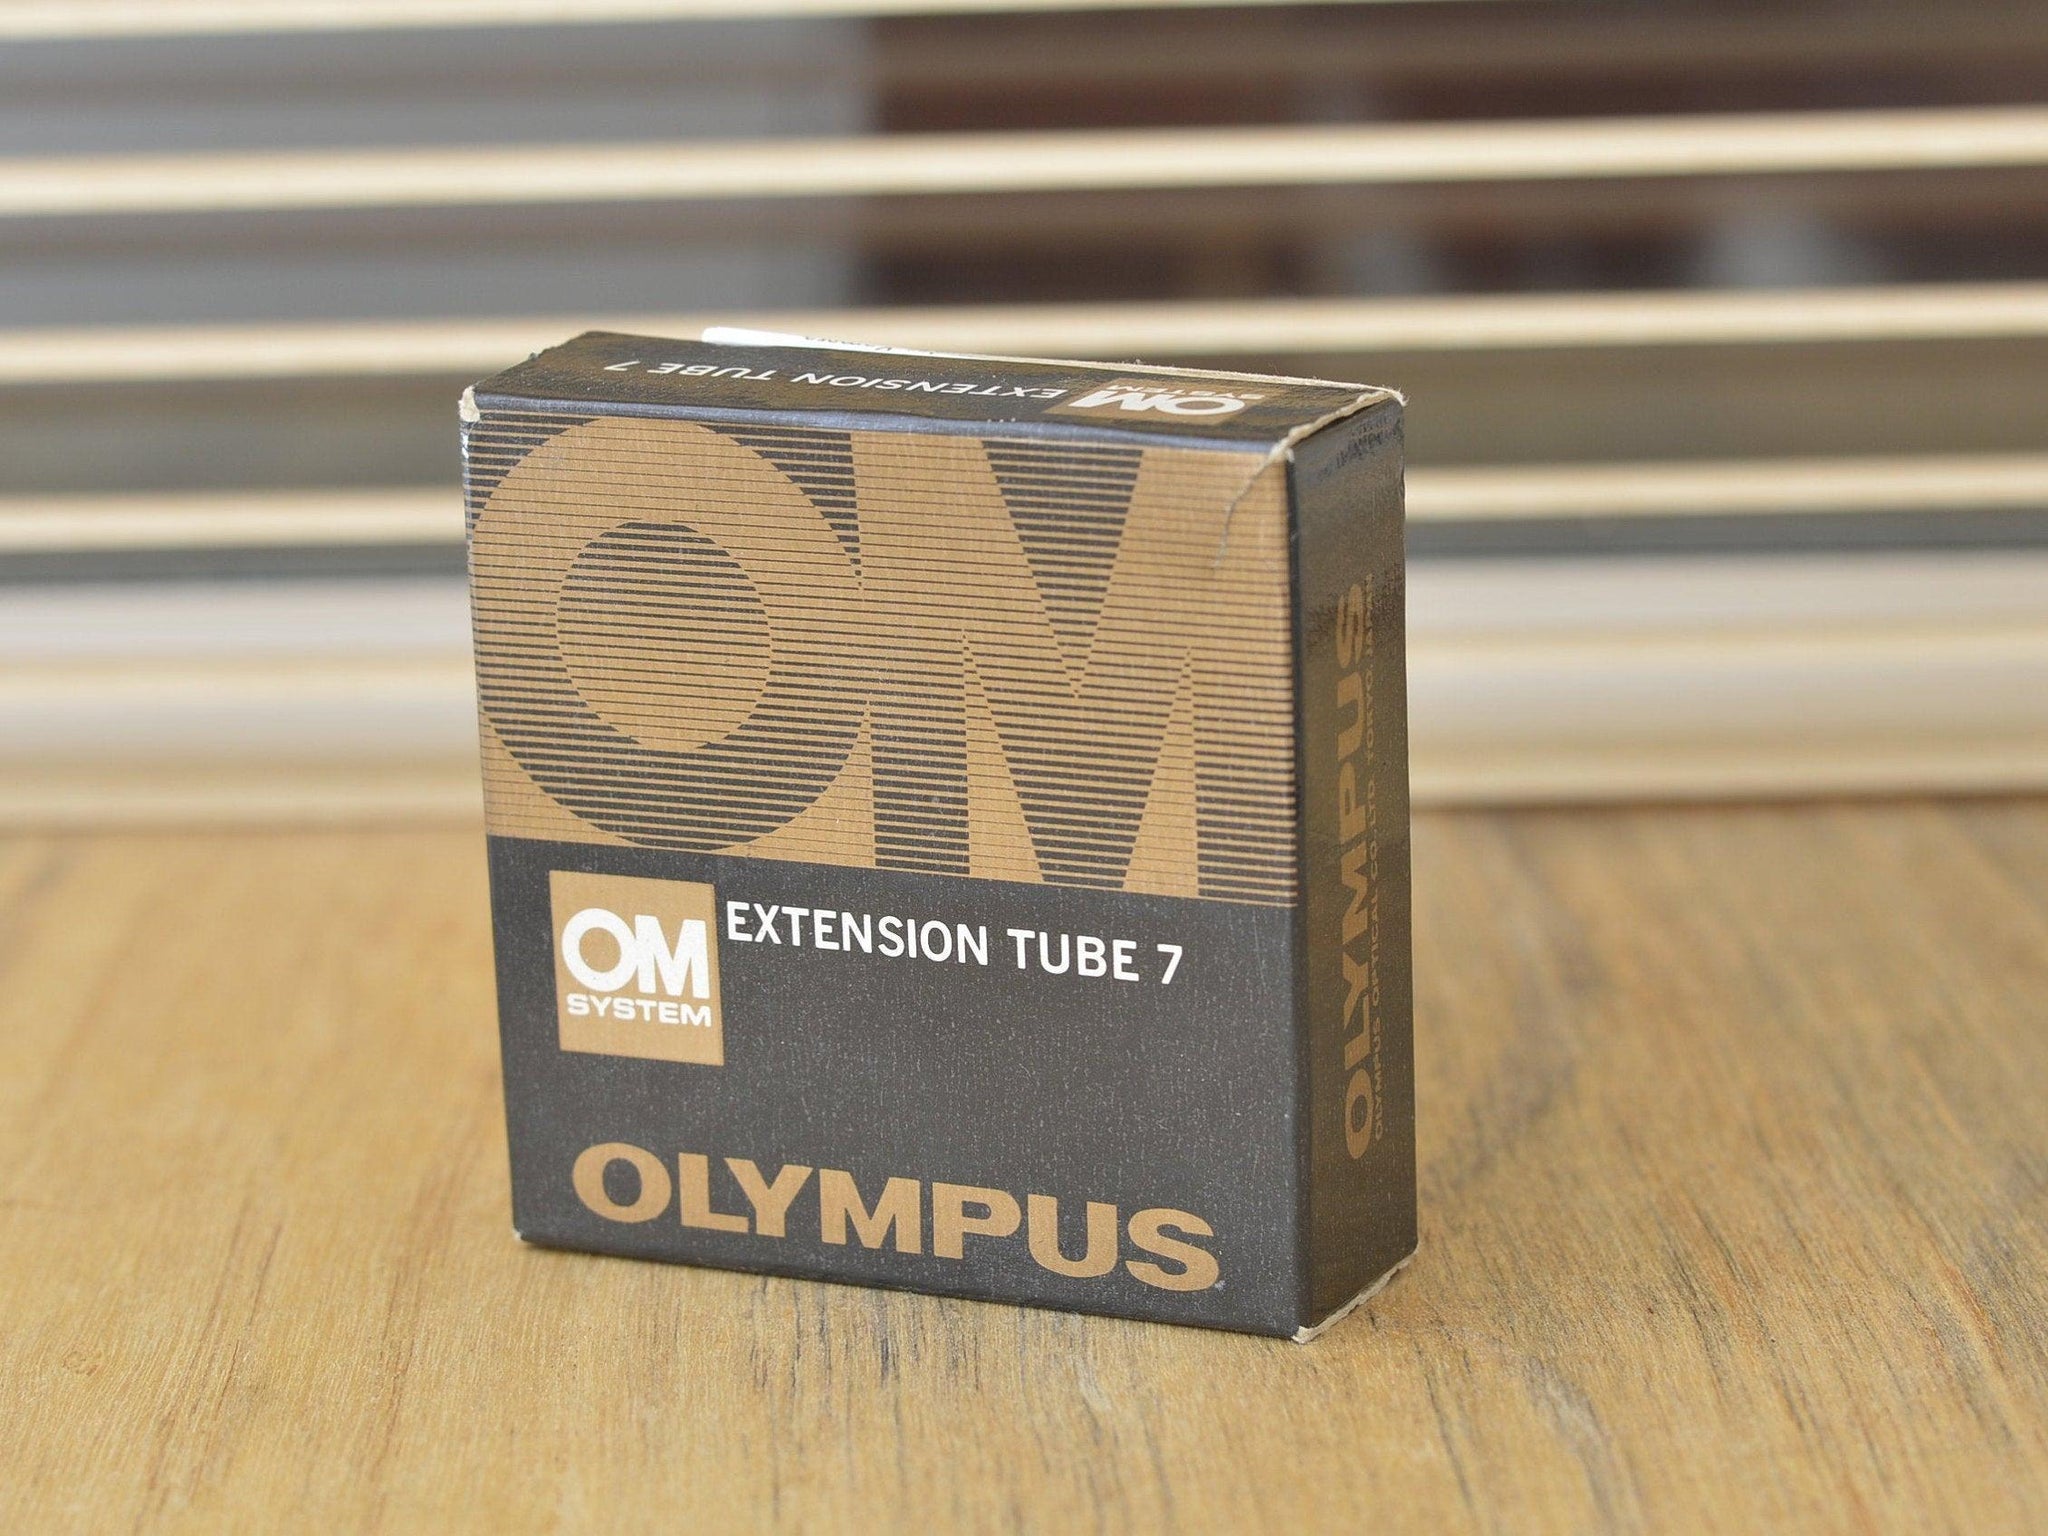 Olympus OM fit extension tube 7. excellent condition in original box and instructions. A great addition to the more advanced photographers. - RewindCameras quality vintage cameras, fully test